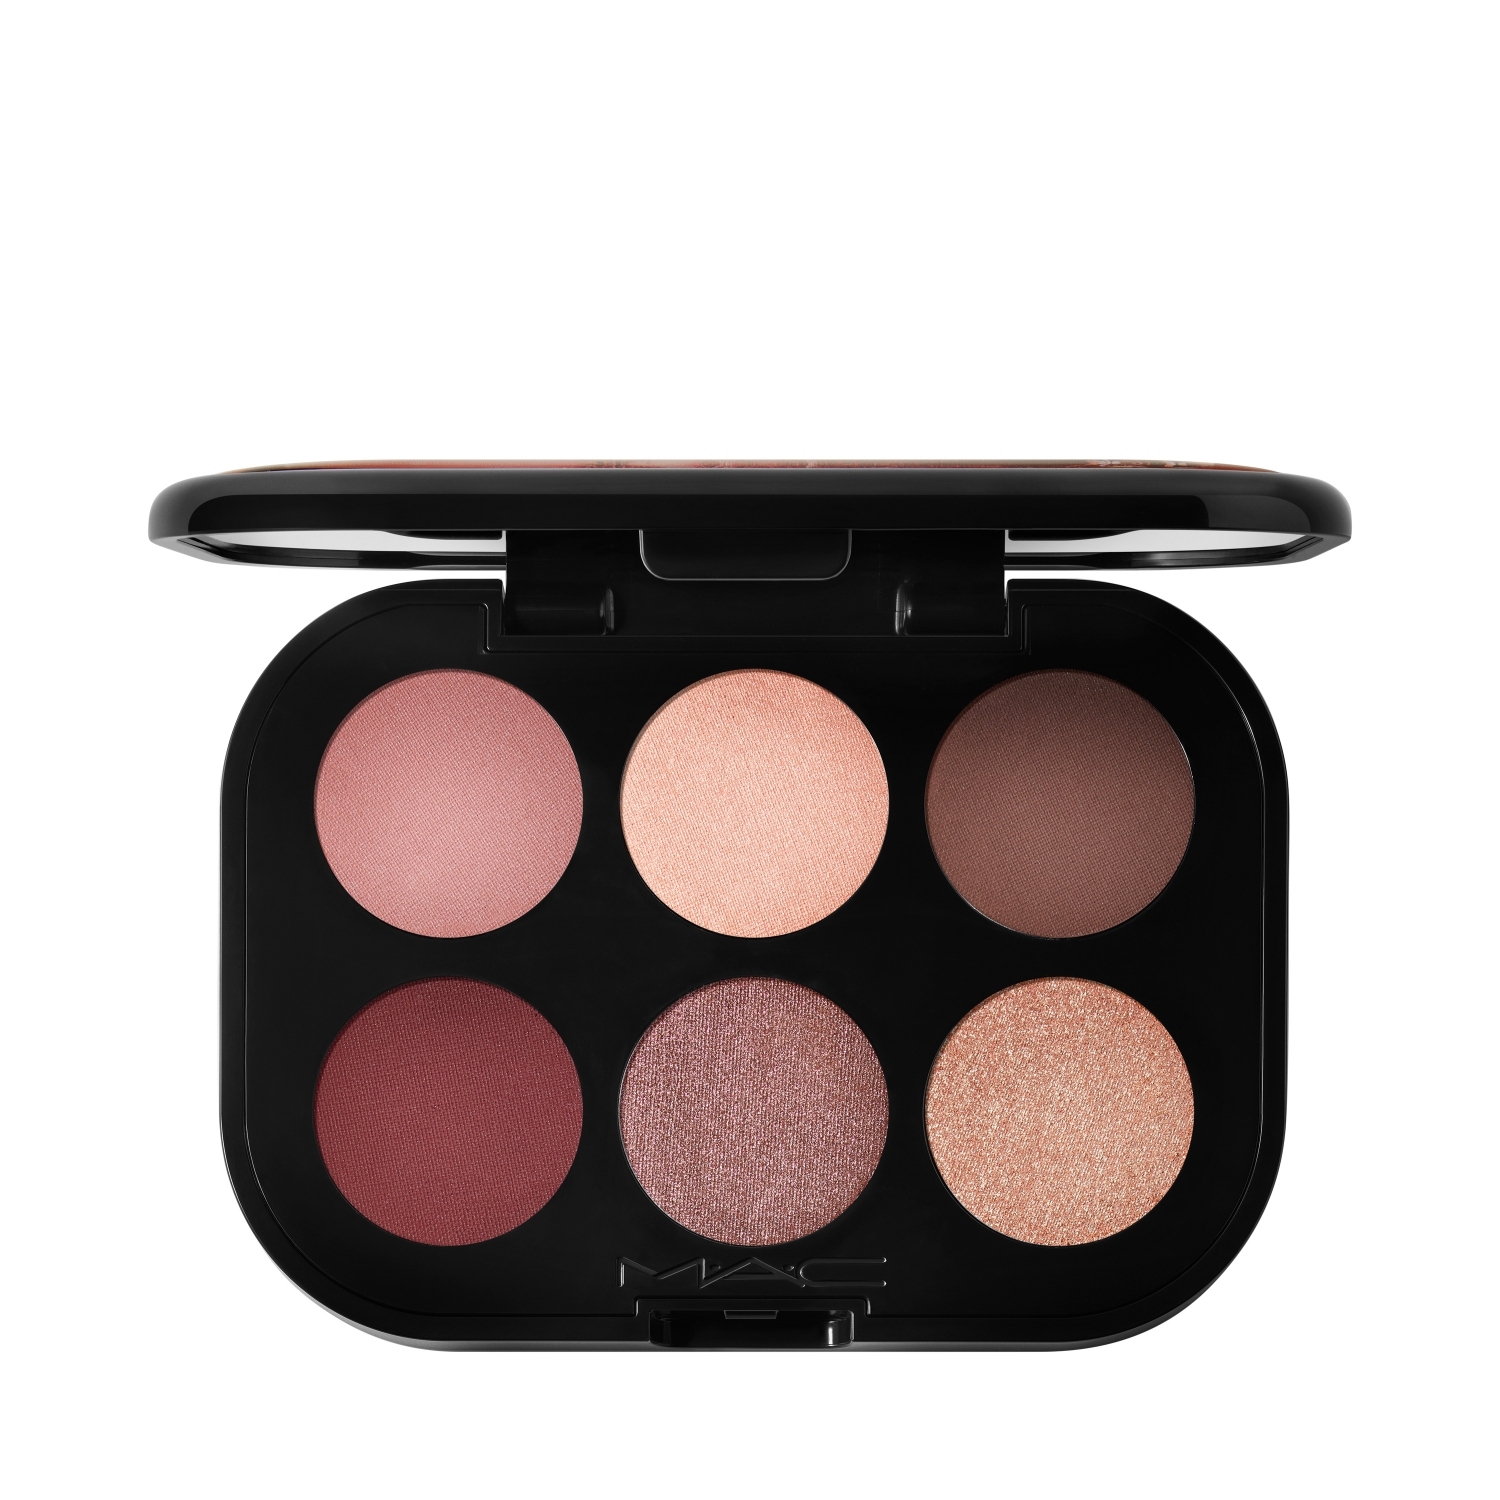 M.A.C | M.A.C Connect In Colour X6 Eye Shadow Palette - Embedded In Burgundy (8.28g)